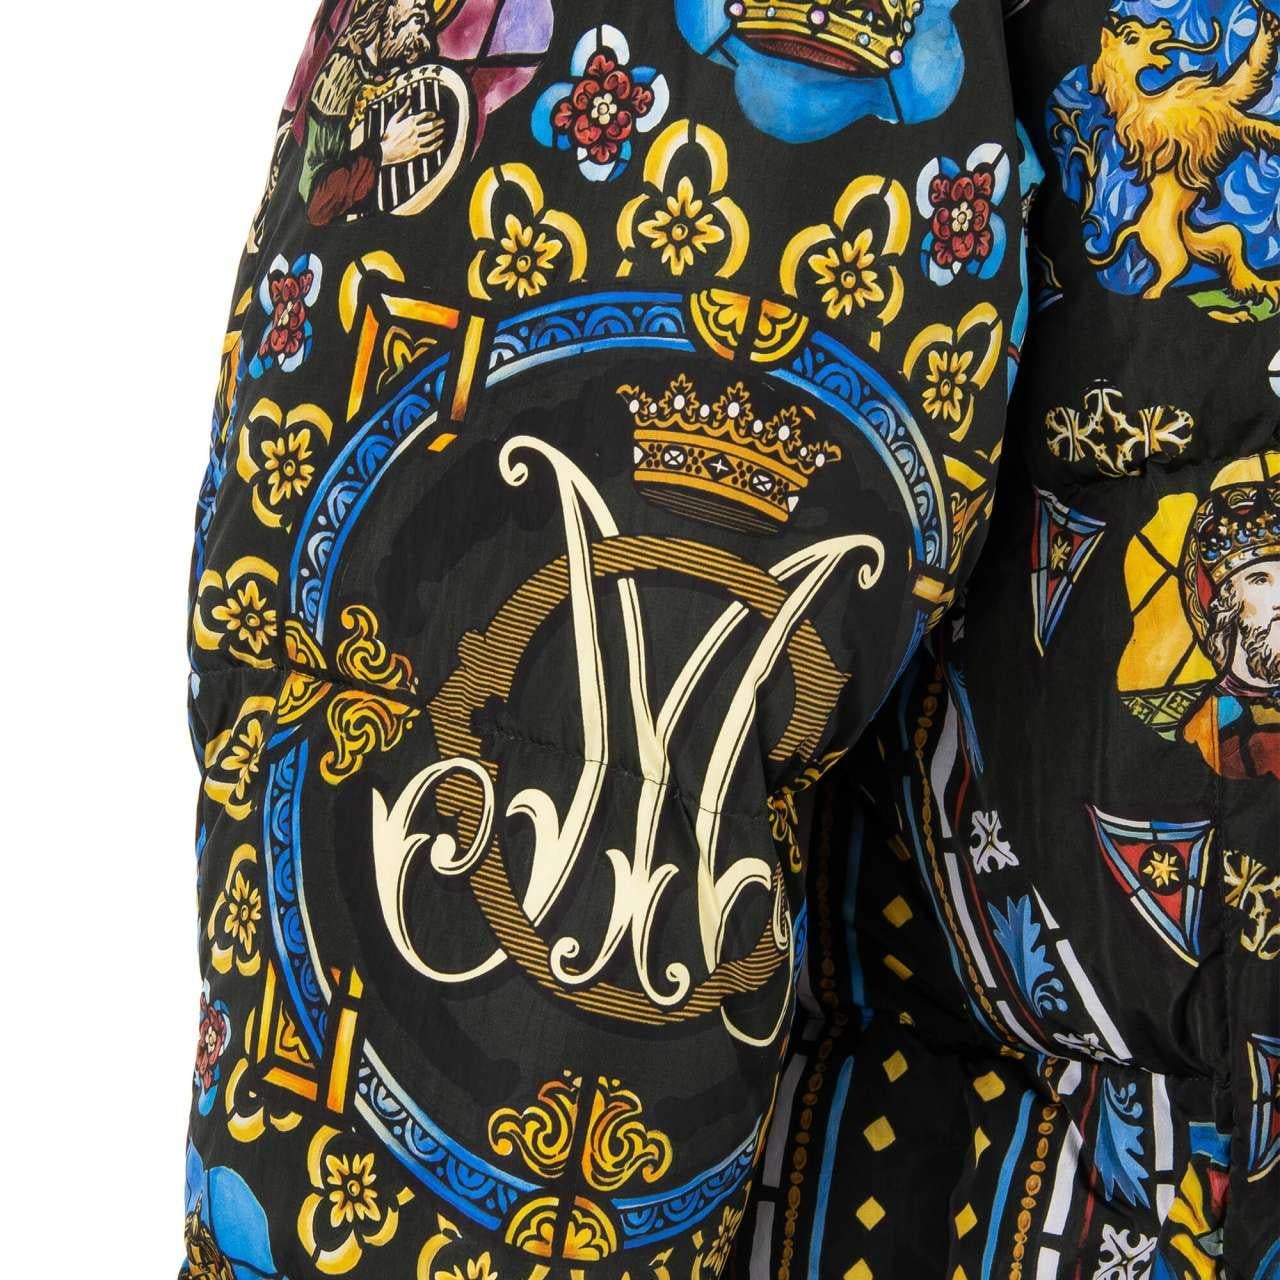 Dolce & Gabbana Carolus Magnus Printed Down Bomber Jacket with Hoody Black M In Excellent Condition For Sale In Erkrath, DE